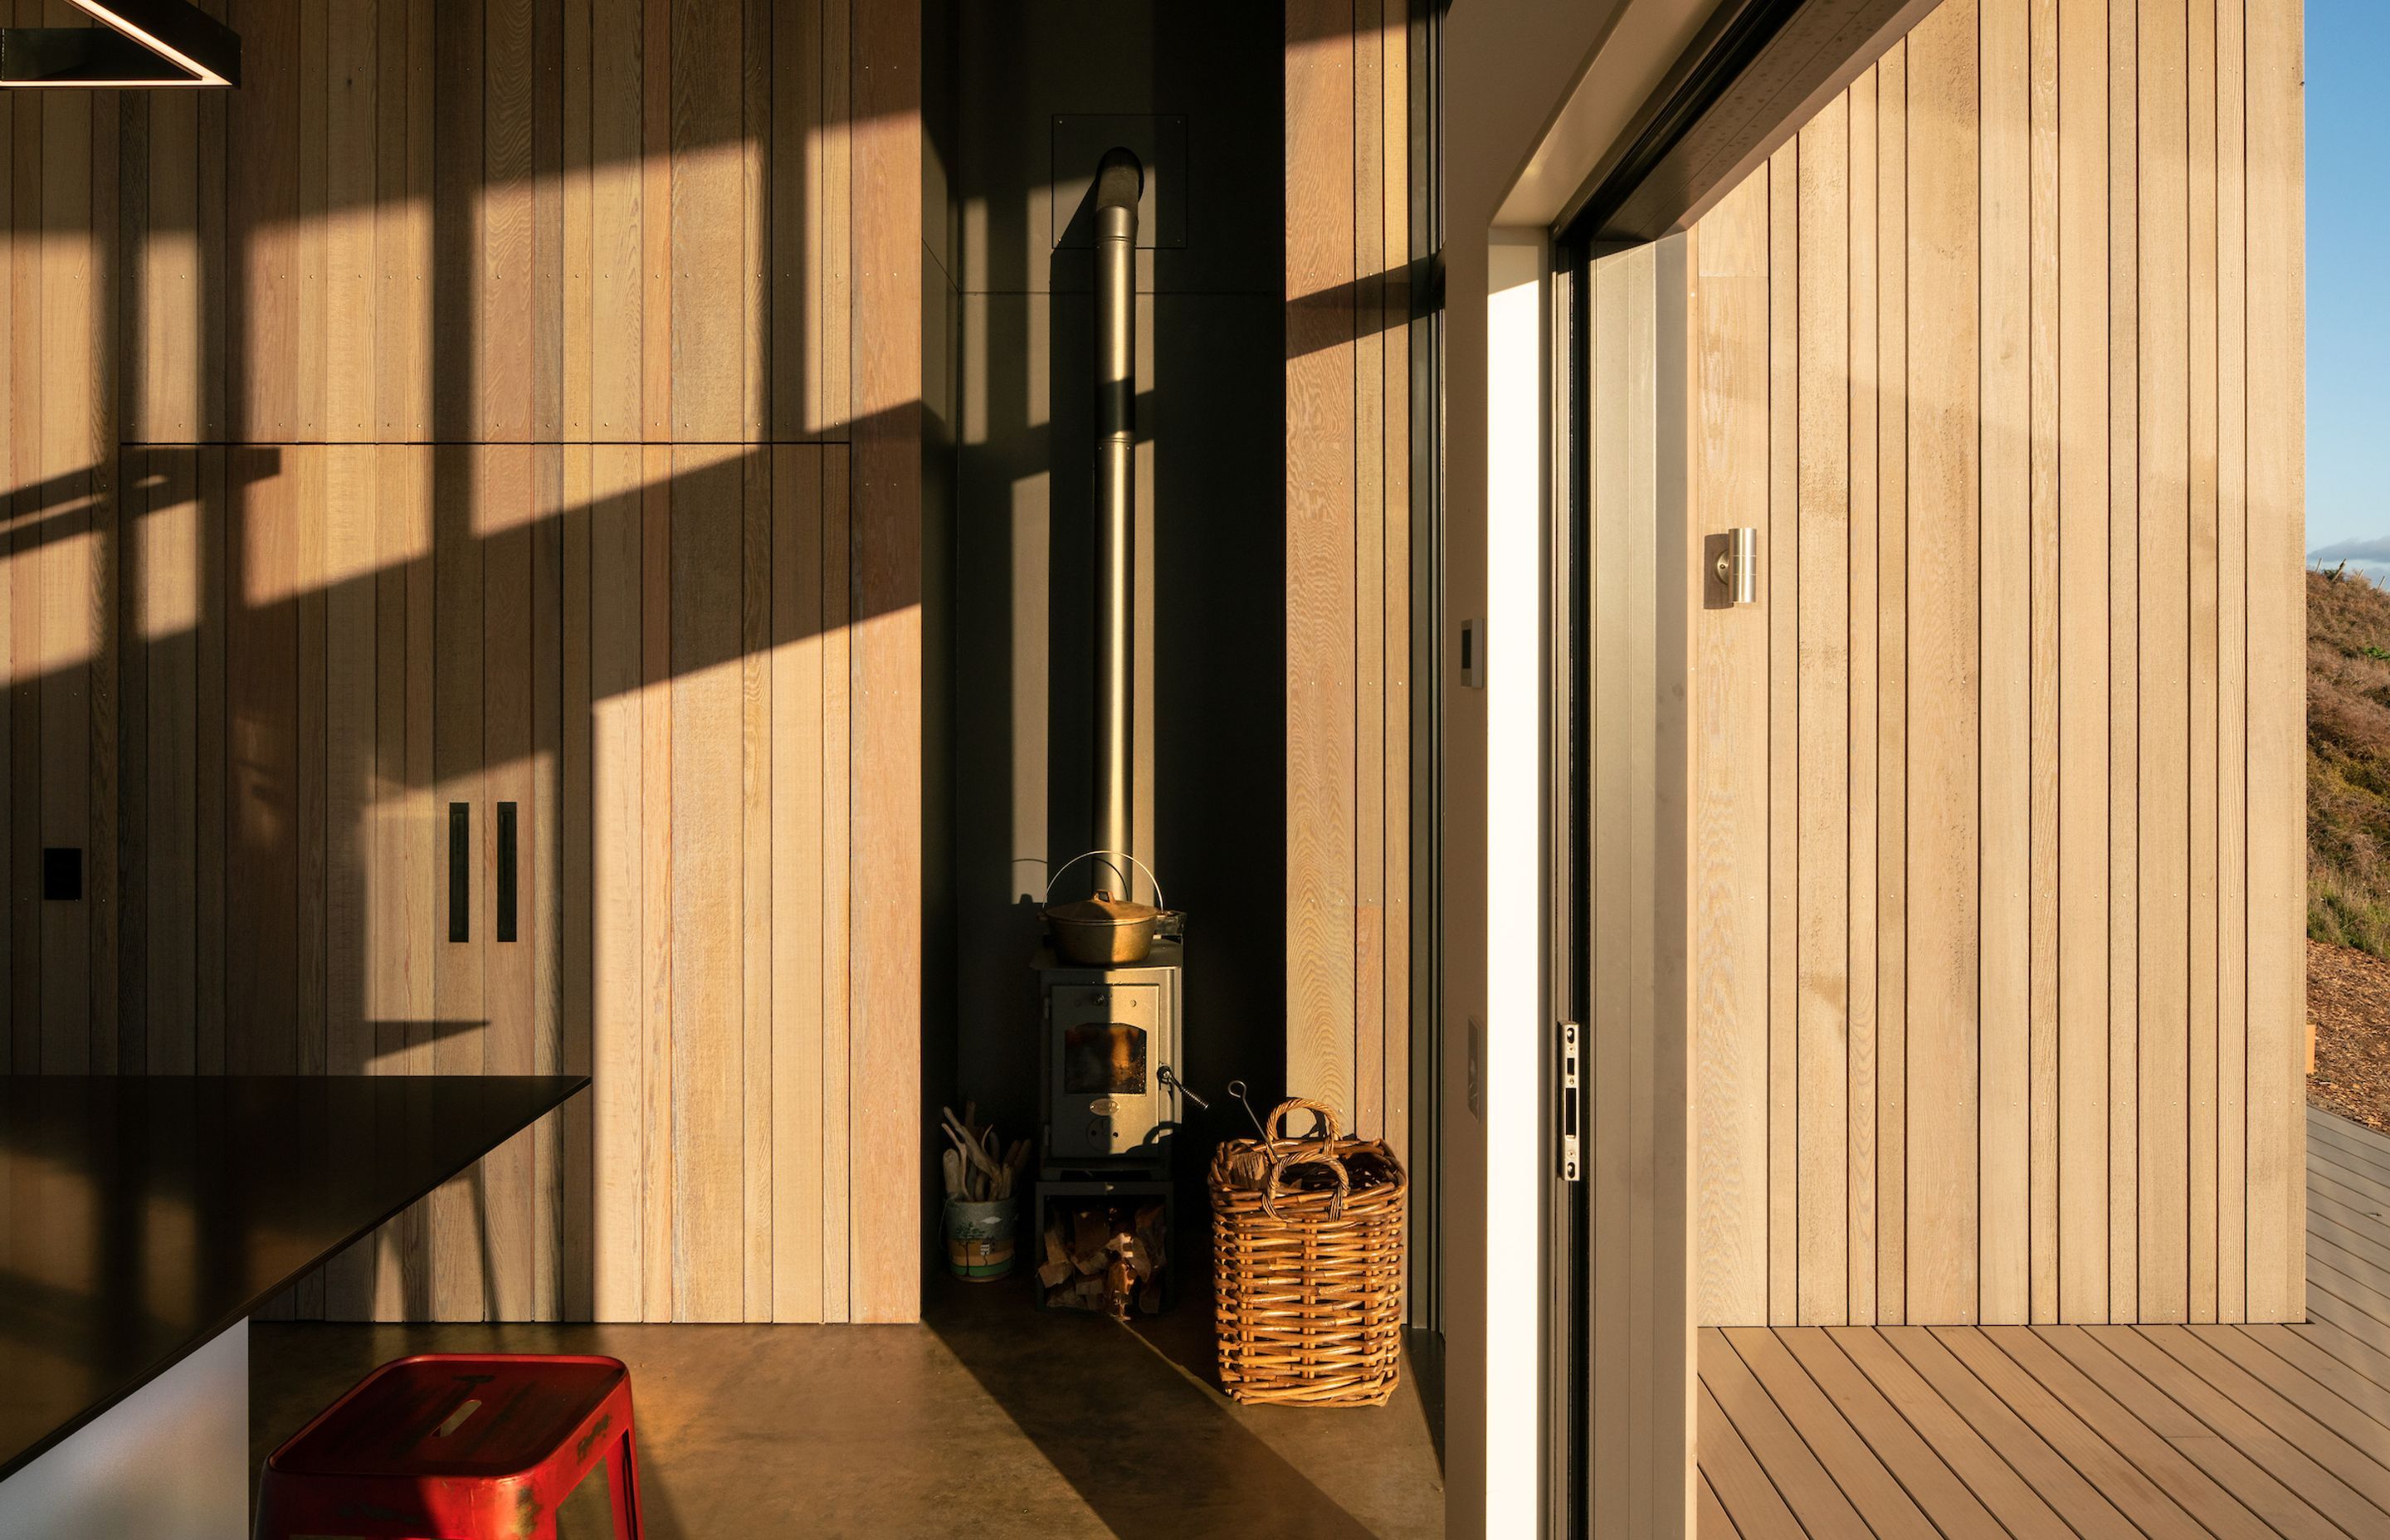 Cedar cladding extends from the exterior to the interior, creating a seamless aesthetic and indoor-outdoor flow.